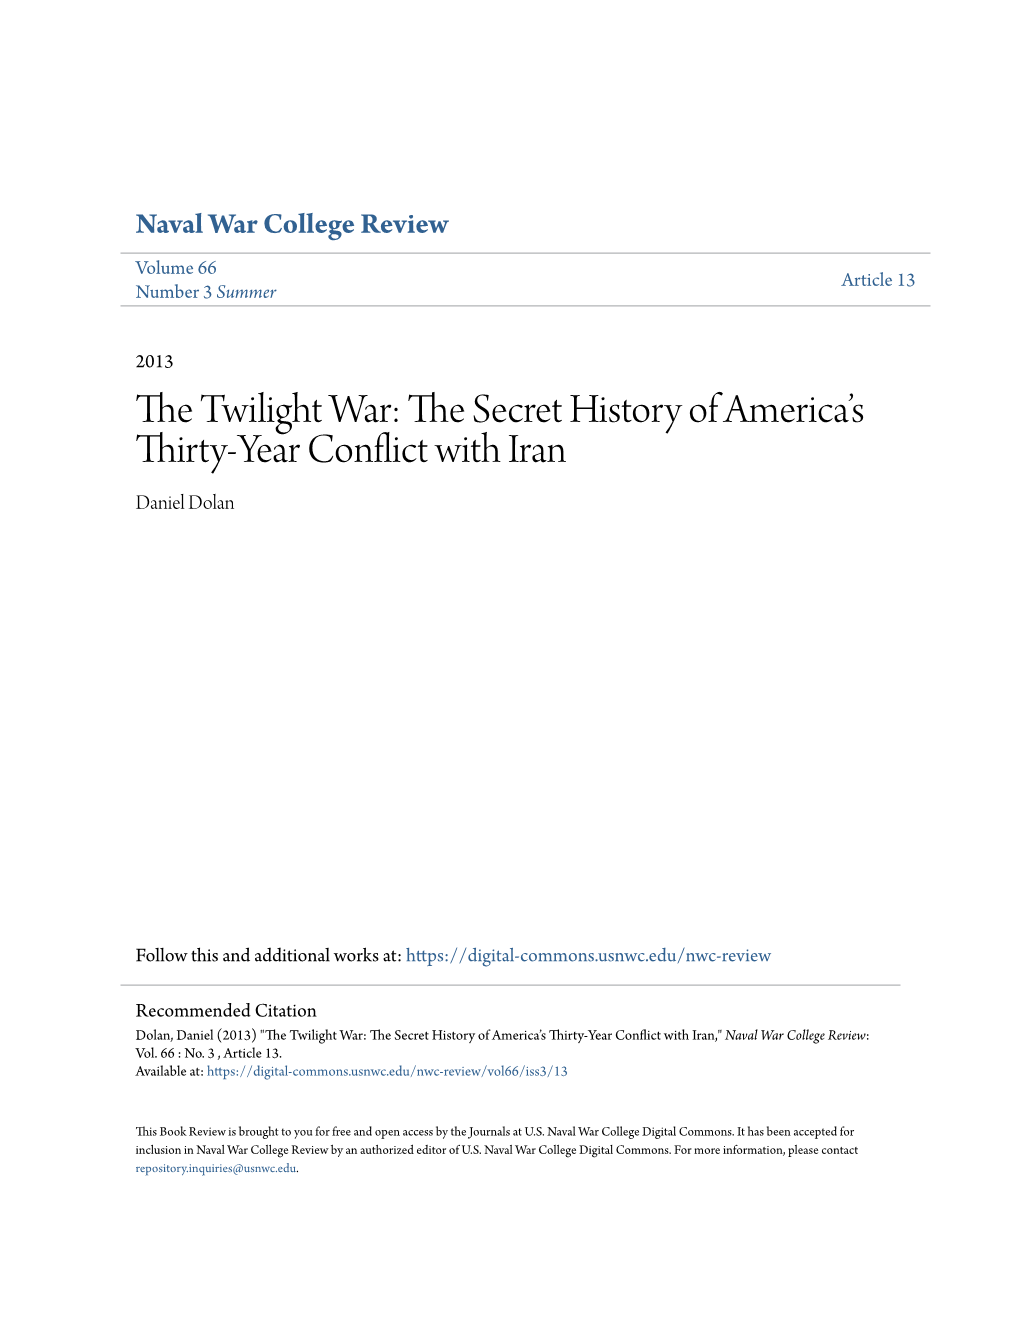 The Secret History of America's Thirty-Year Conflict with Iran